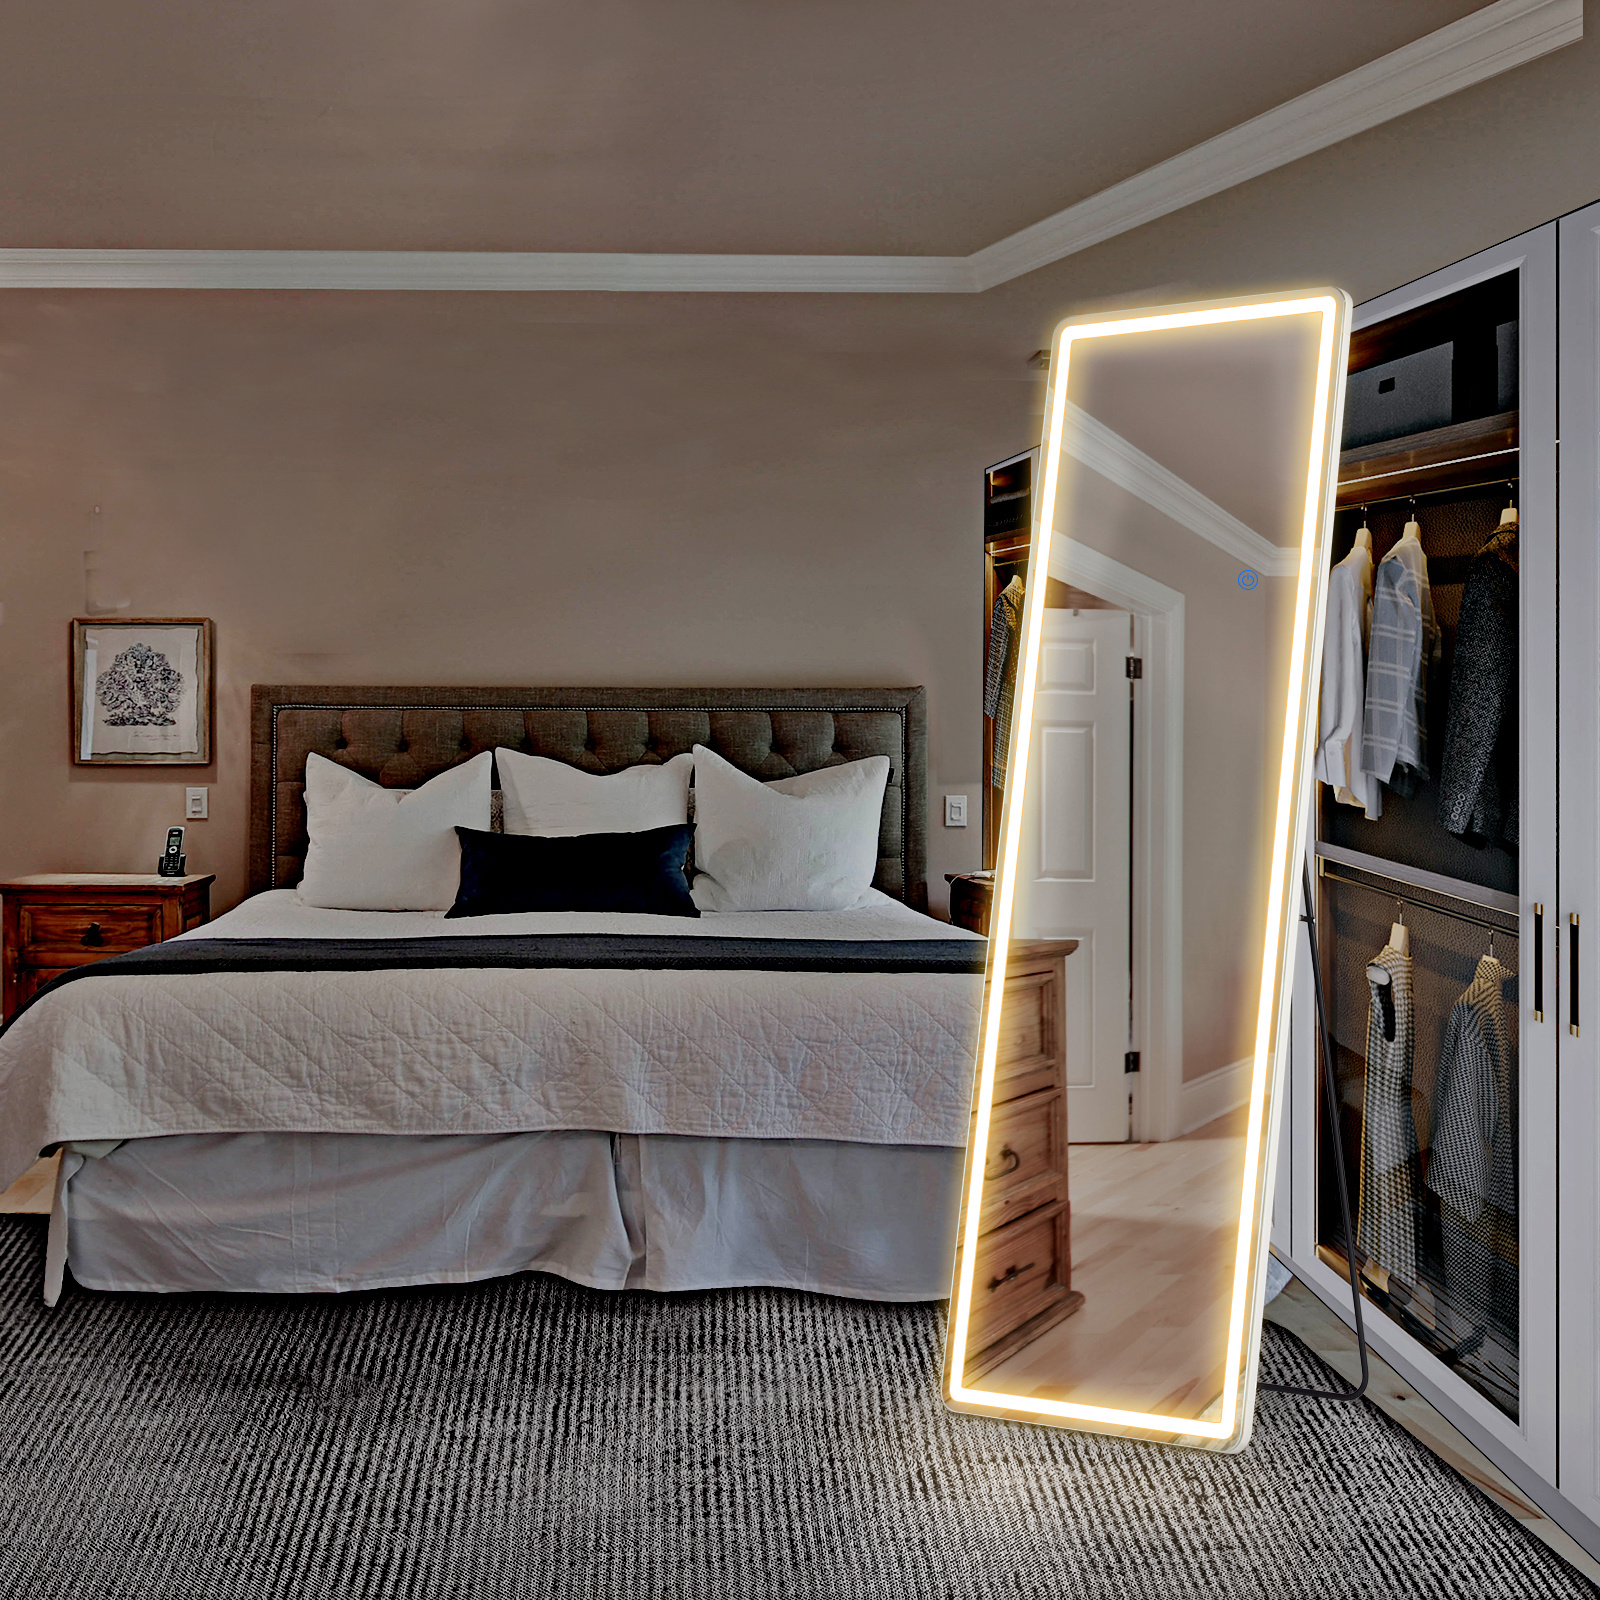 

64x21 Full Body Mirror With Led Lights, Over-the-door Mirror With 3 Color Modes And Adjustable Brightness, Luminous Wall Mirror For Bedroom And Living Room